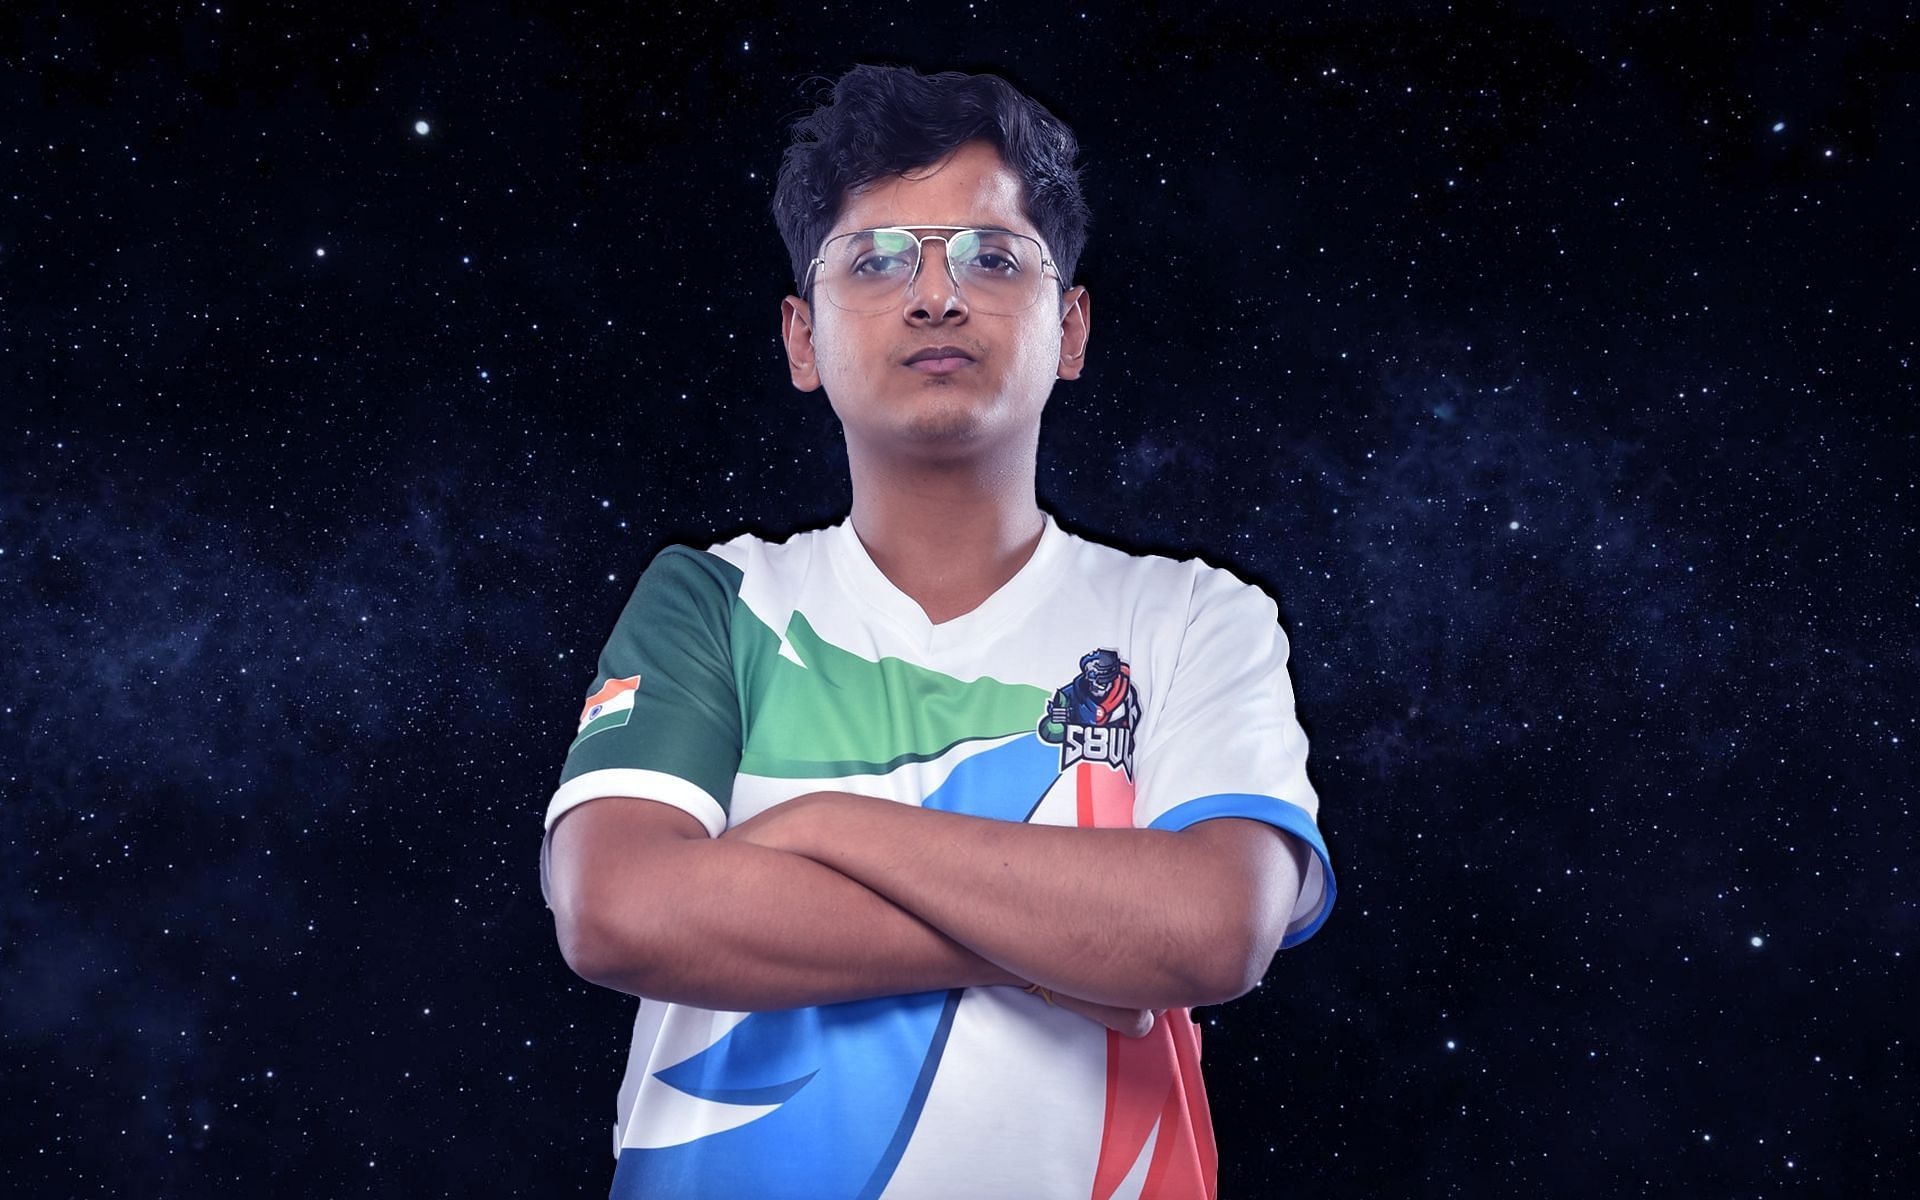 BGMI pro MortaL is one of the most individuals in the Indian gaming community (Image via Sportskeeda)